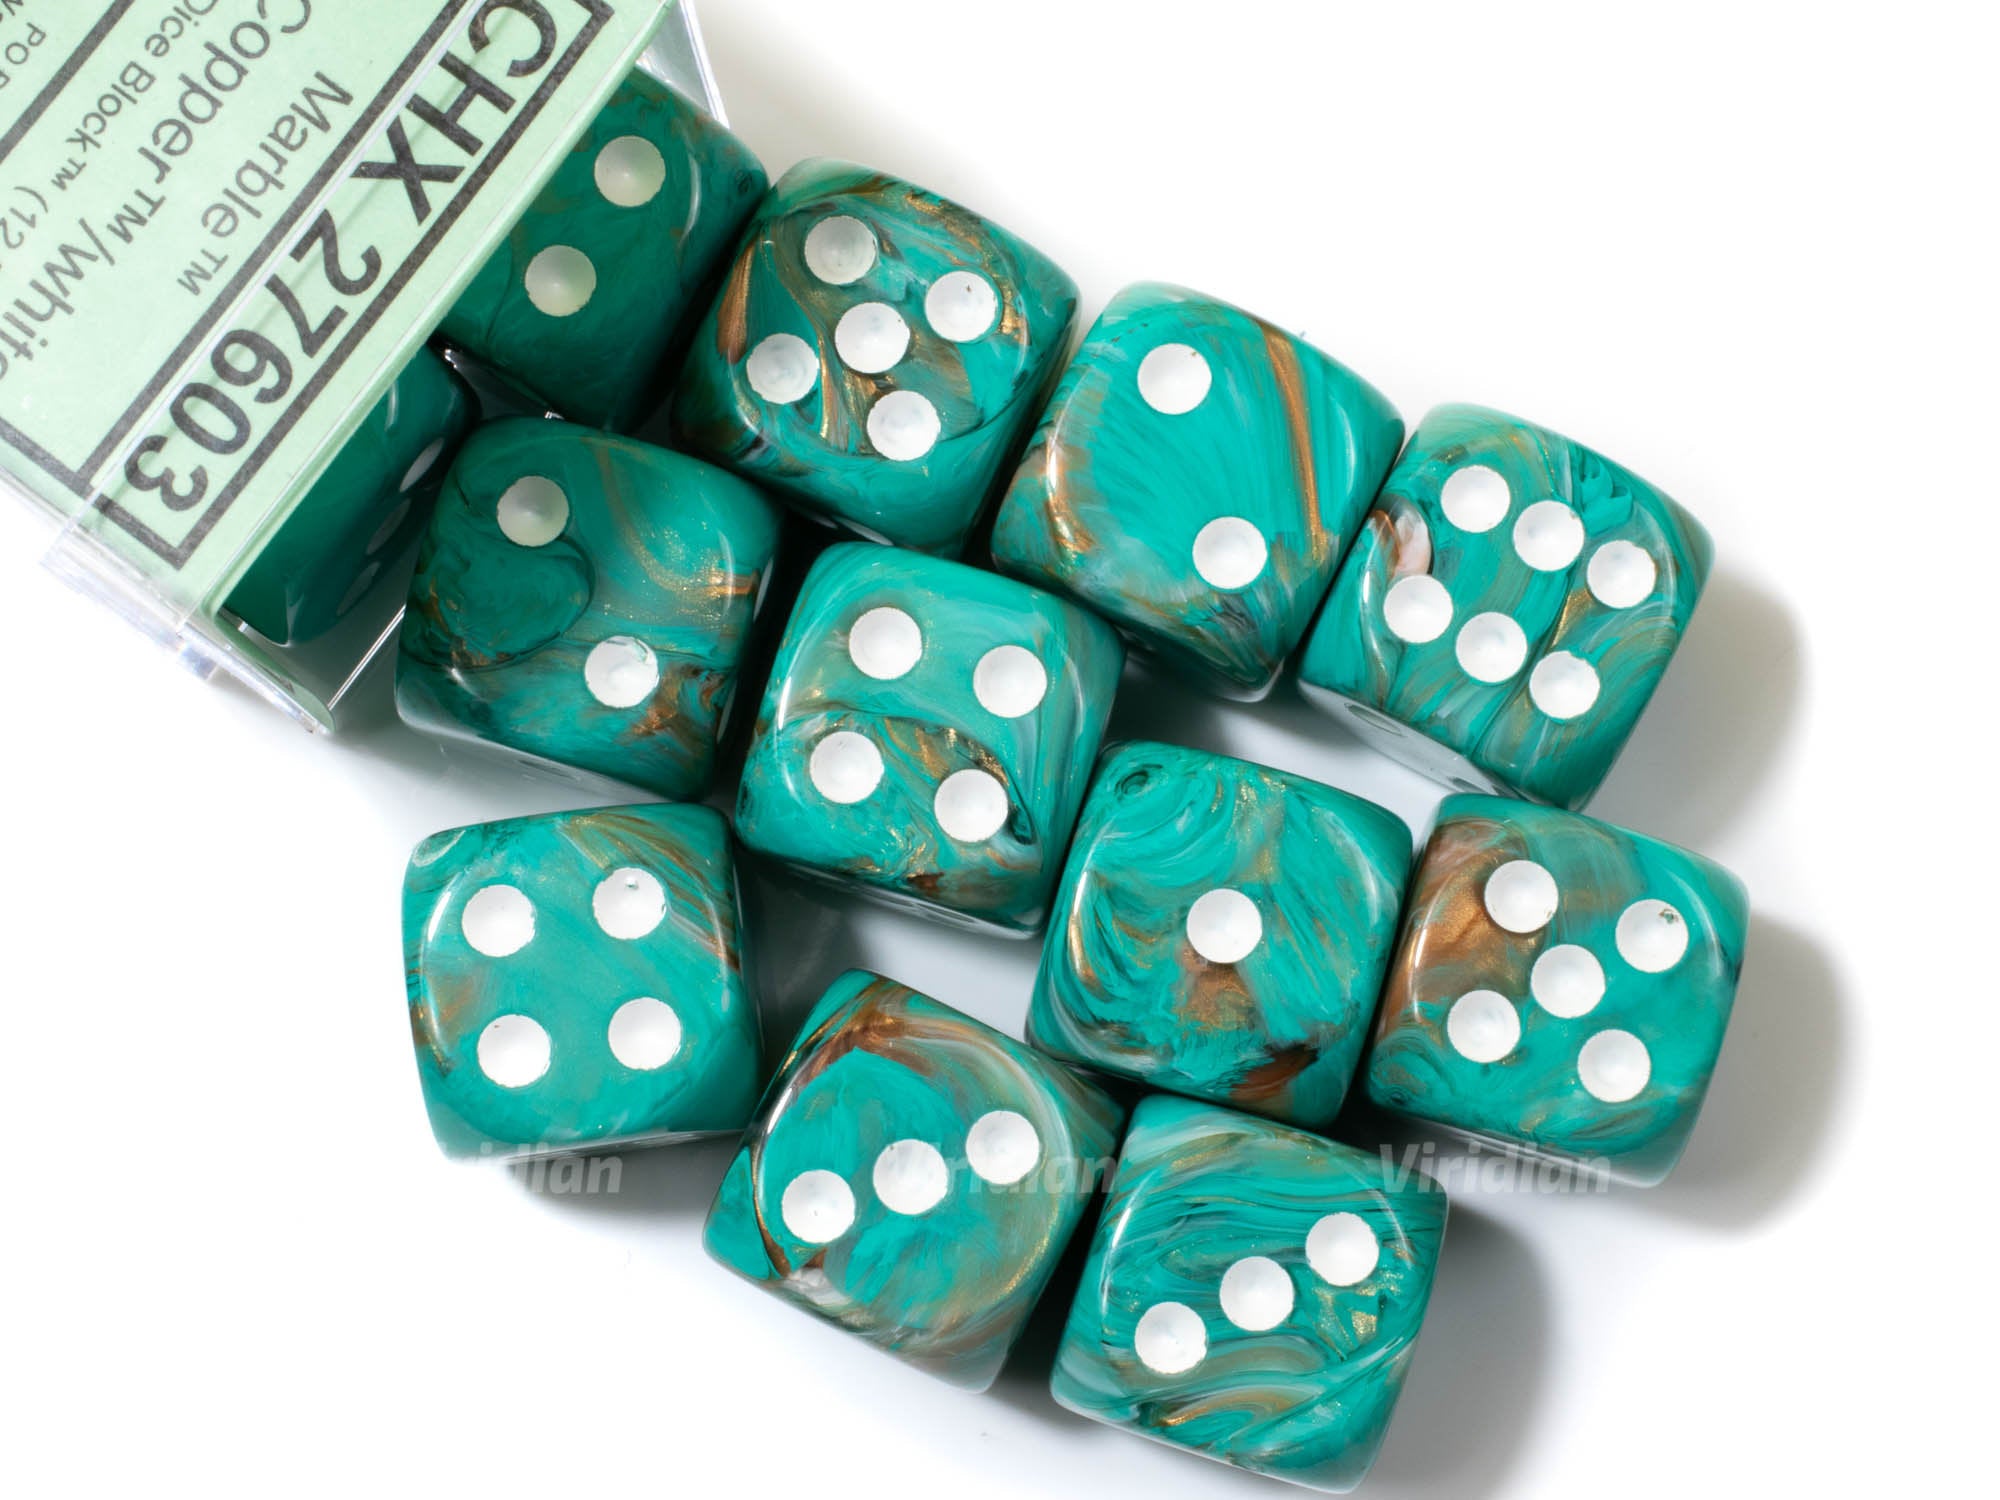 Marble Oxi-Copper & White | Green, Brown | D6 Block | Chessex Dice (12)